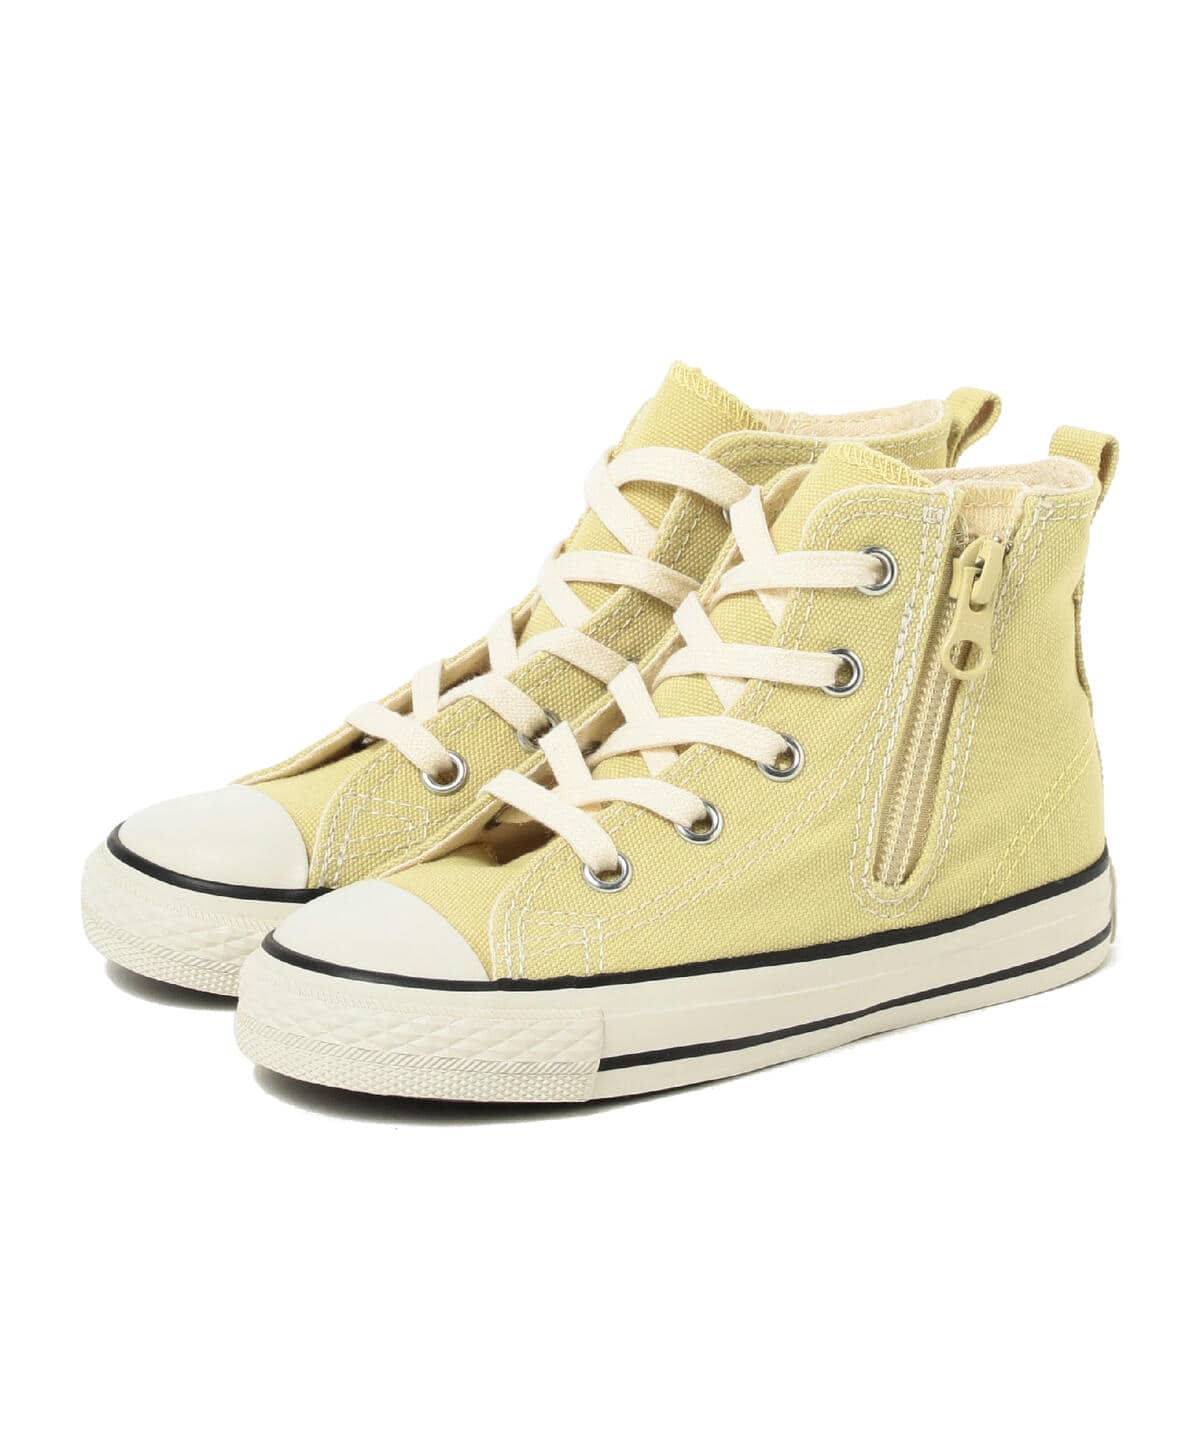 B:MING by BEAMS（ビーミング by ビームス）CONVERSE / CHILD ALL STAR 